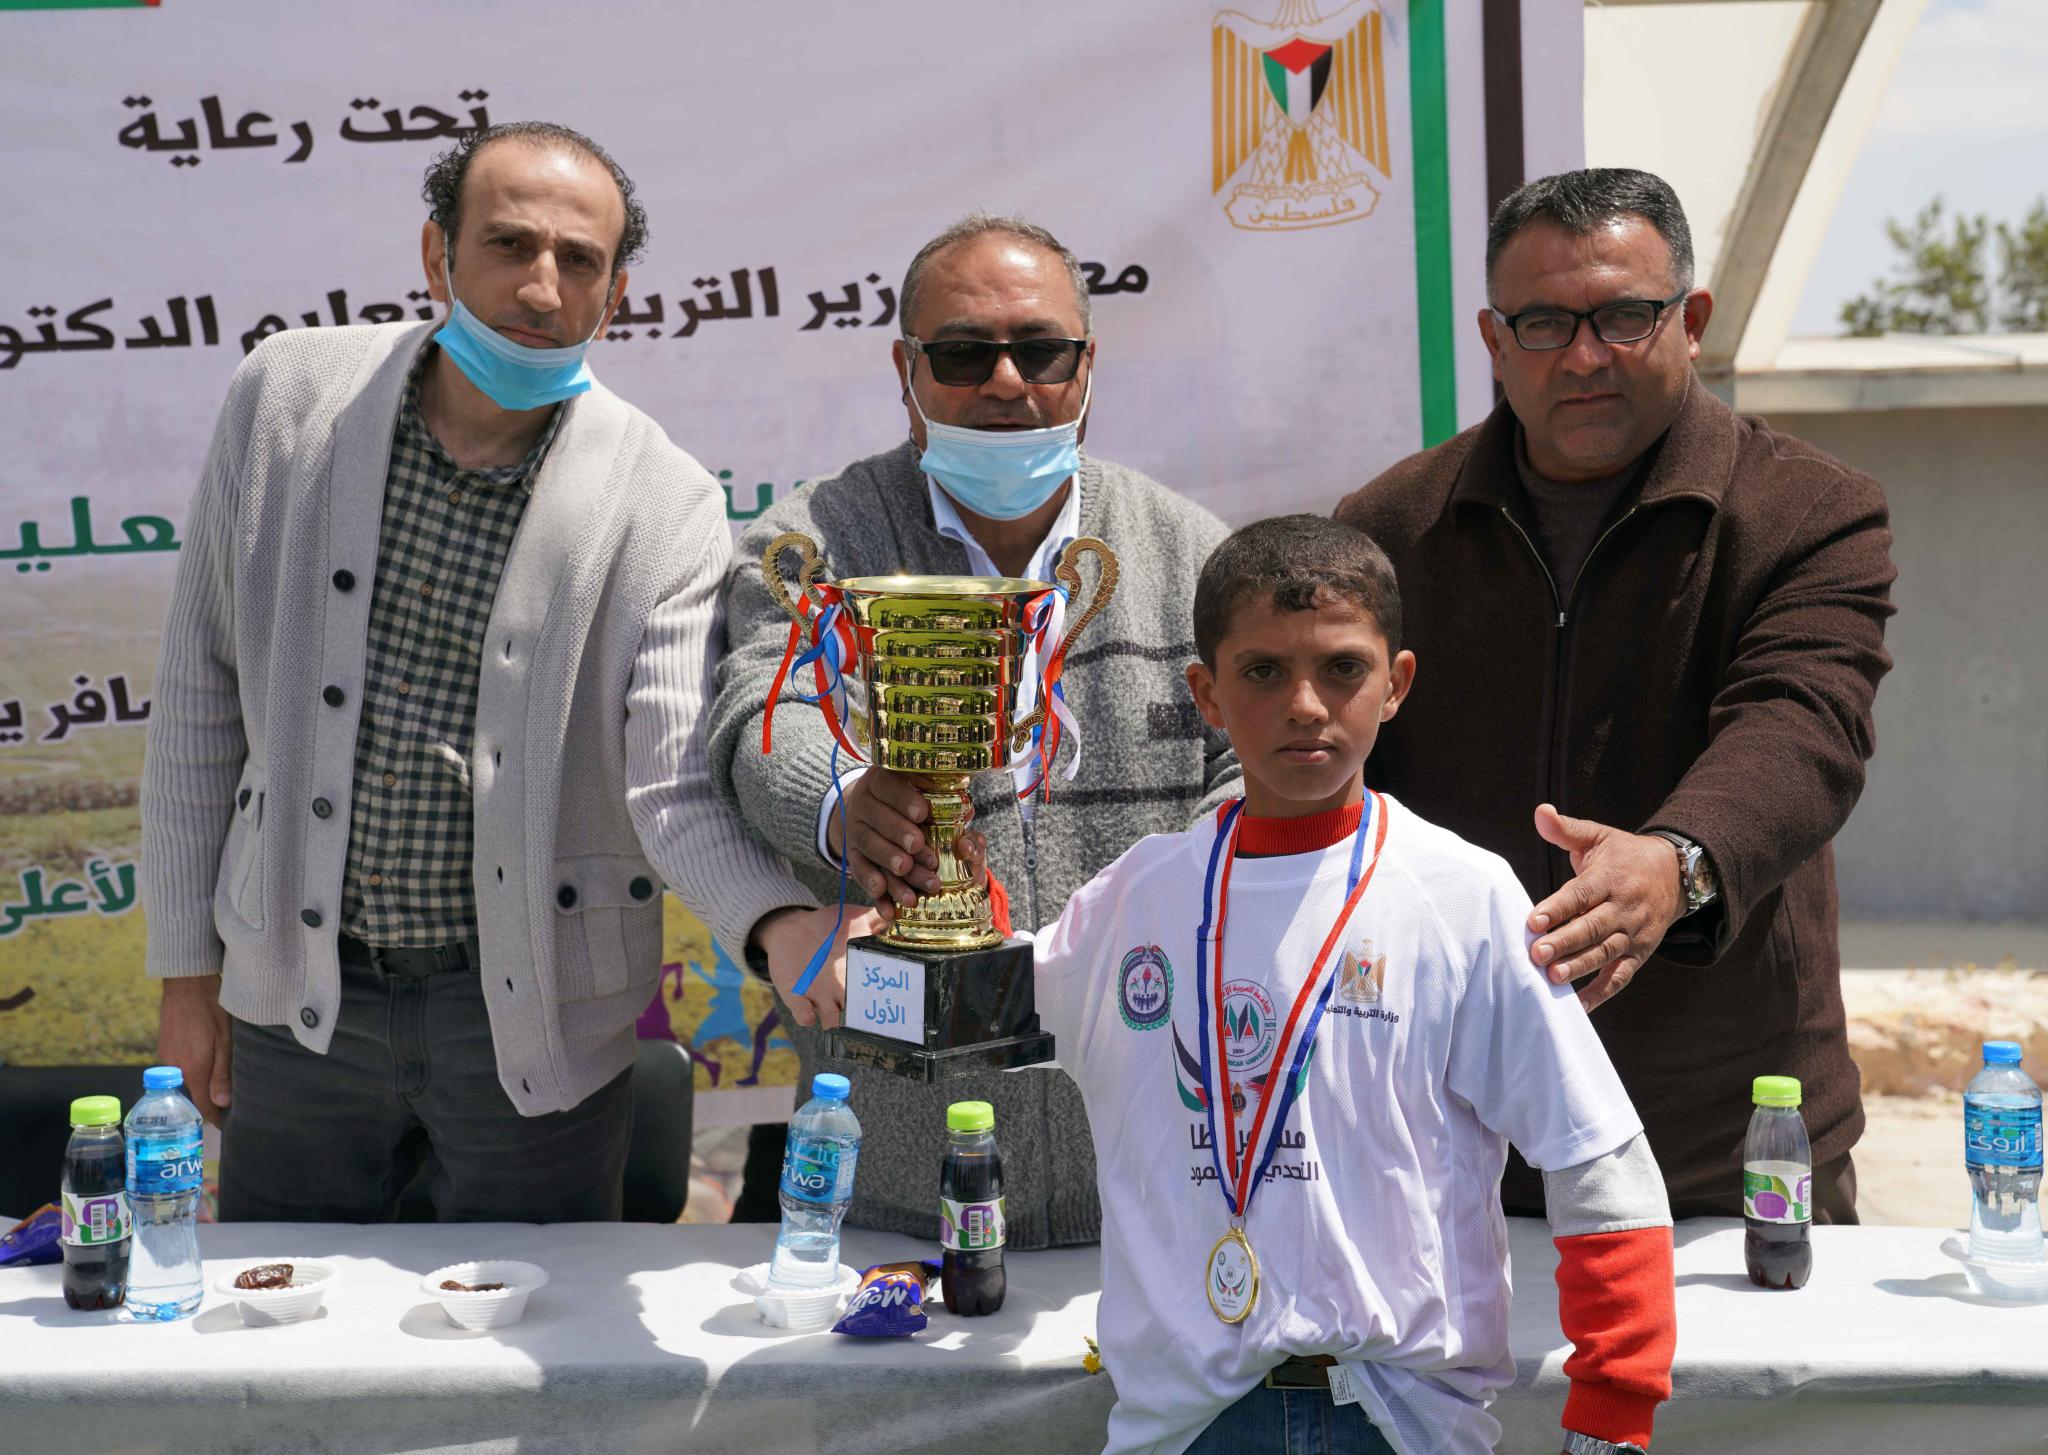 On its 20th Anniversary, AAUP and under a Joint Partnership with the Ministry of Education and the Supreme Council for Youth and Sports Organizes a Marathon "To Support Massafer Yatta Case"